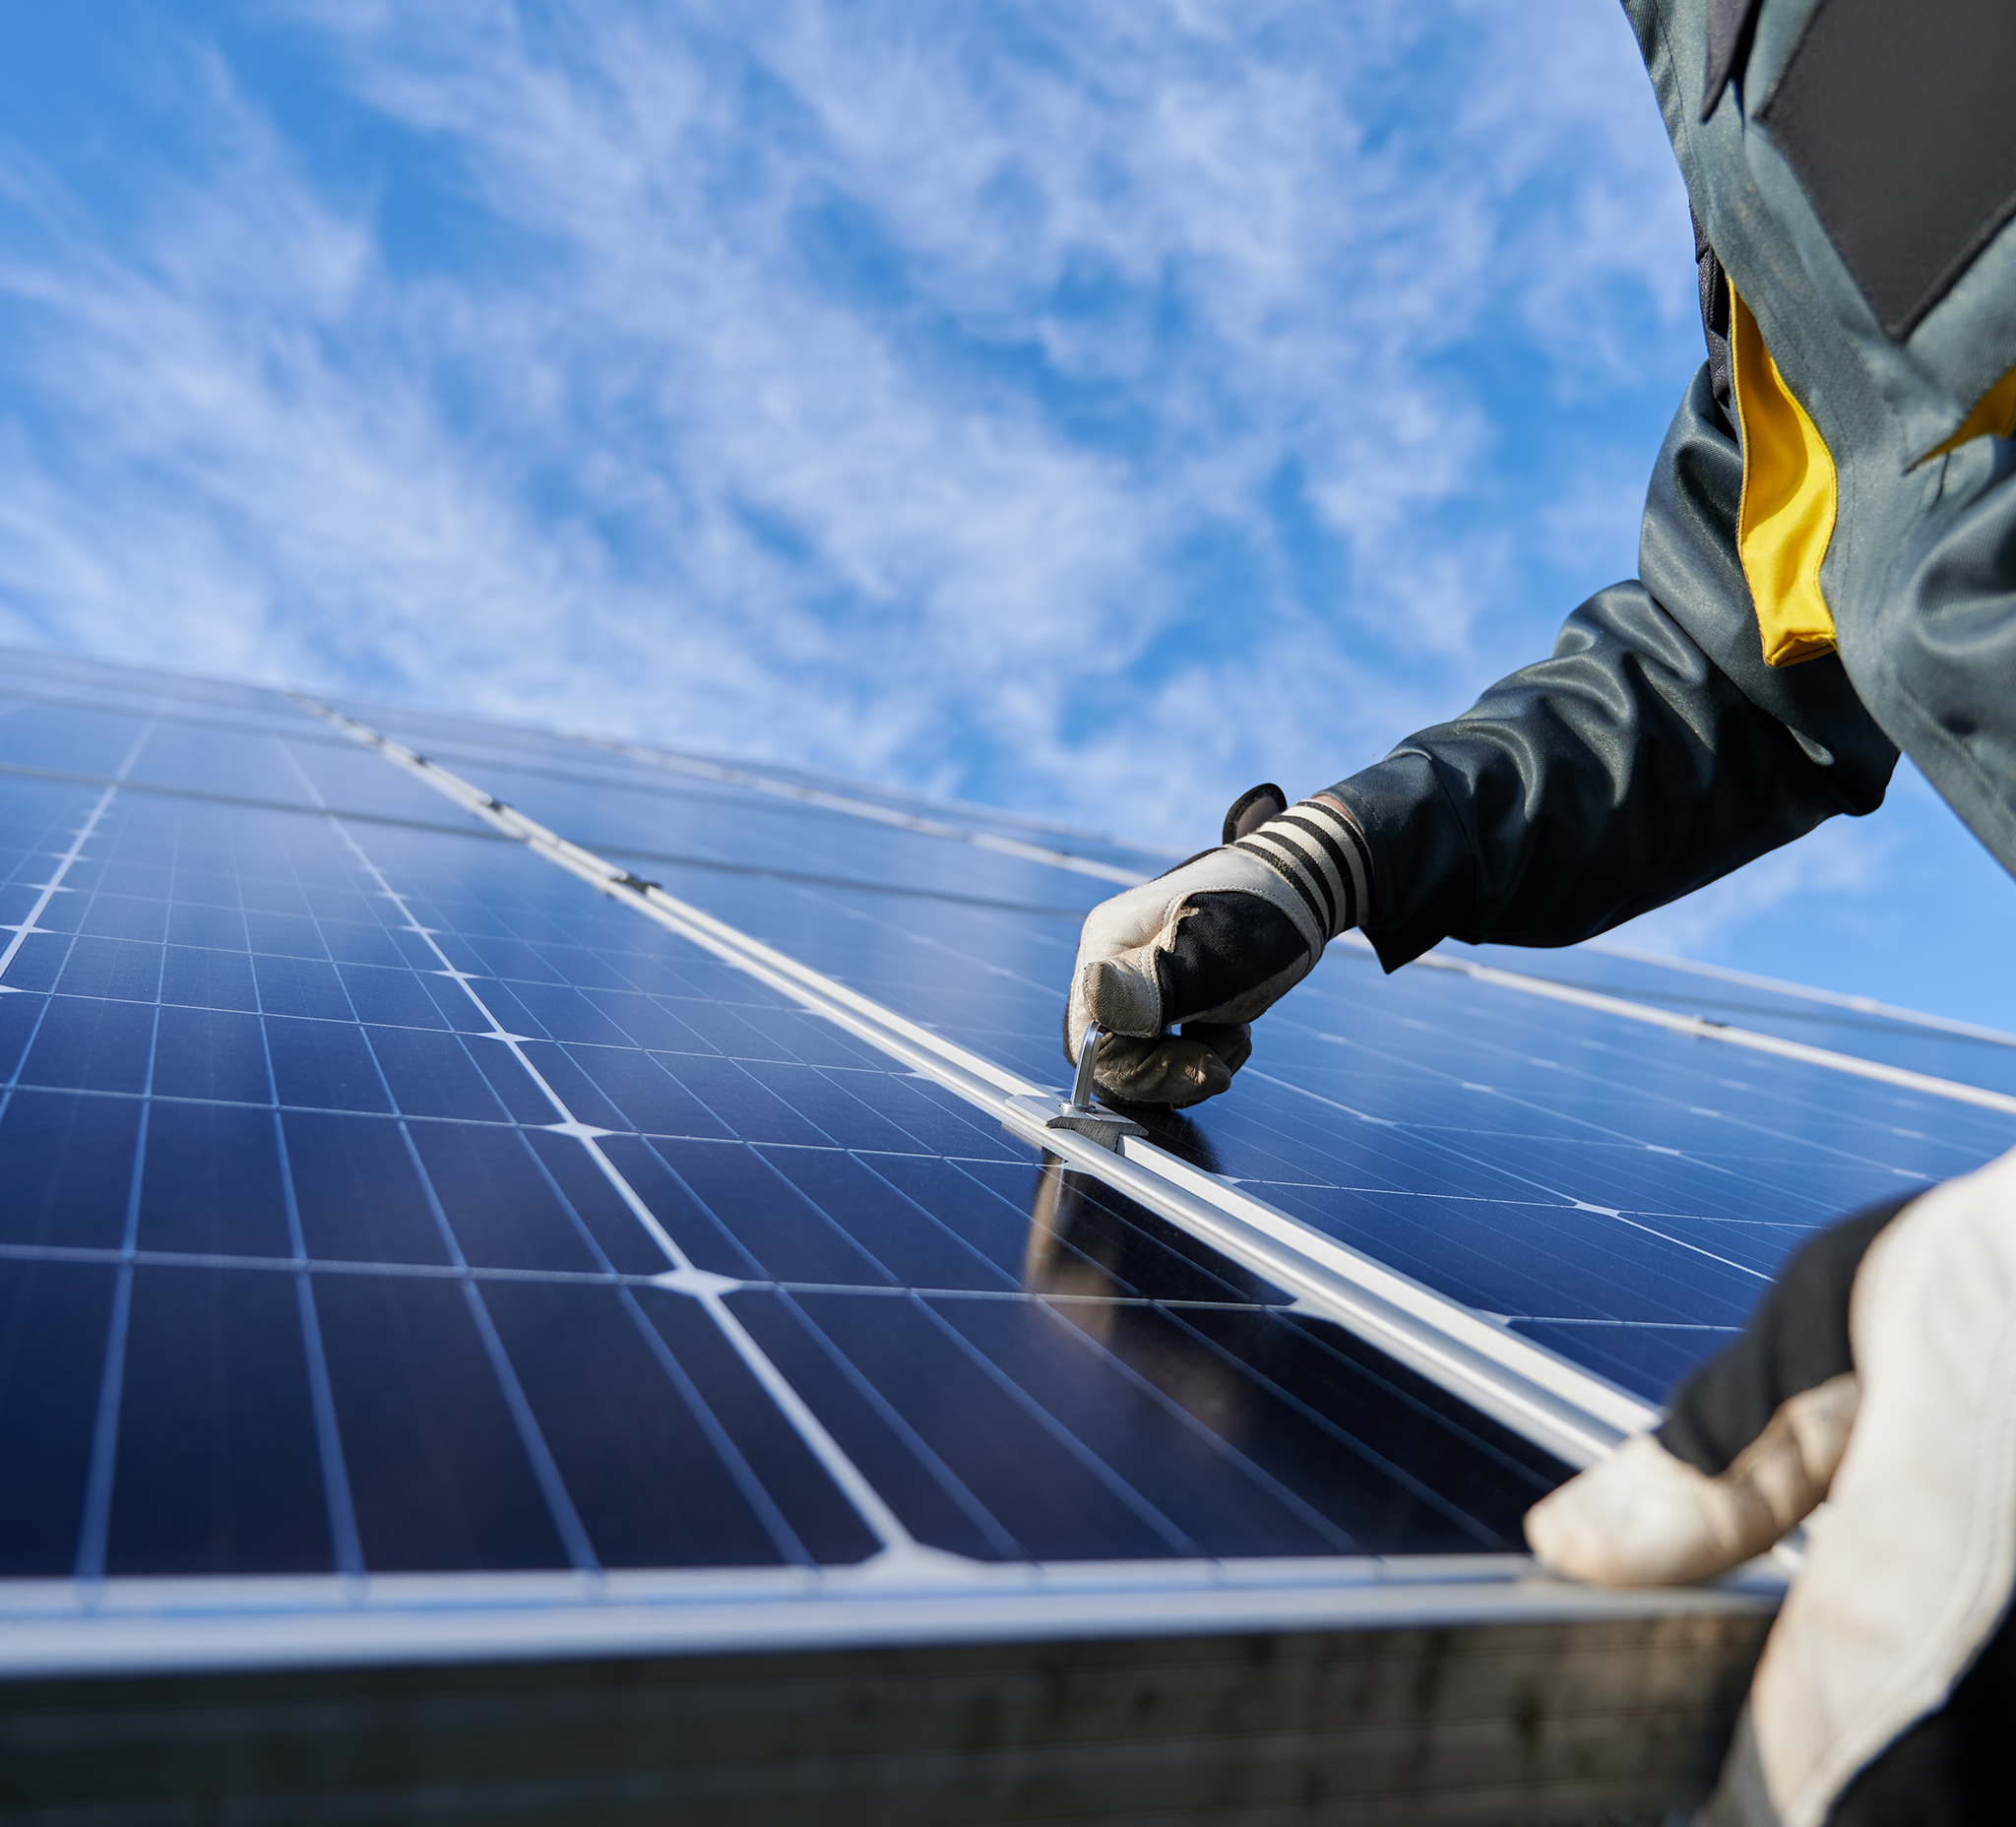 A person wearing protective gloves adjusts a fastening on a solar panel.